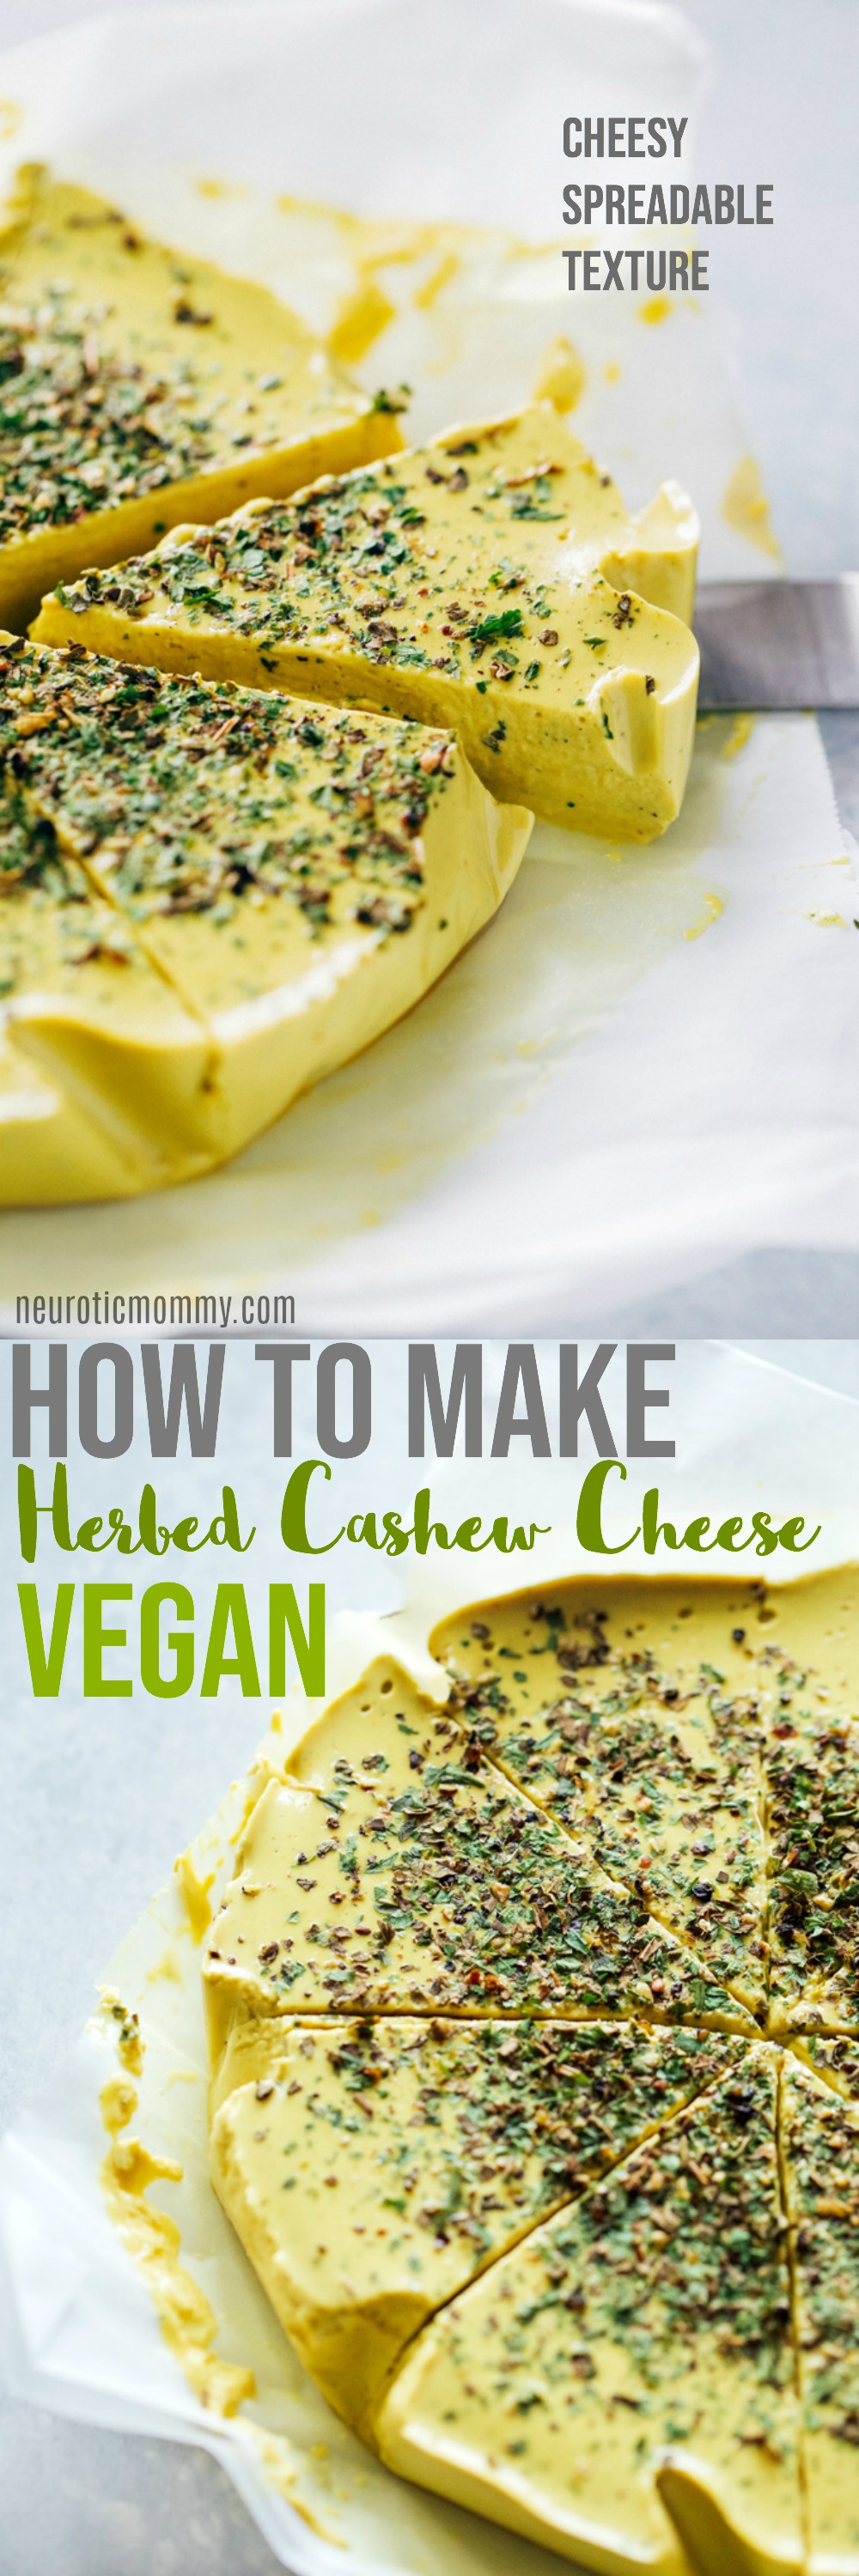 How To Make Herbed Cashew Cheese-Super cheesy texture with a salt and nutty flavor. Put this on your next vegan cheese board or serve it up on some veggie burgers for the win. Either way you're going to love it! NeuroticMommy.com #vegancheese #dairyfree